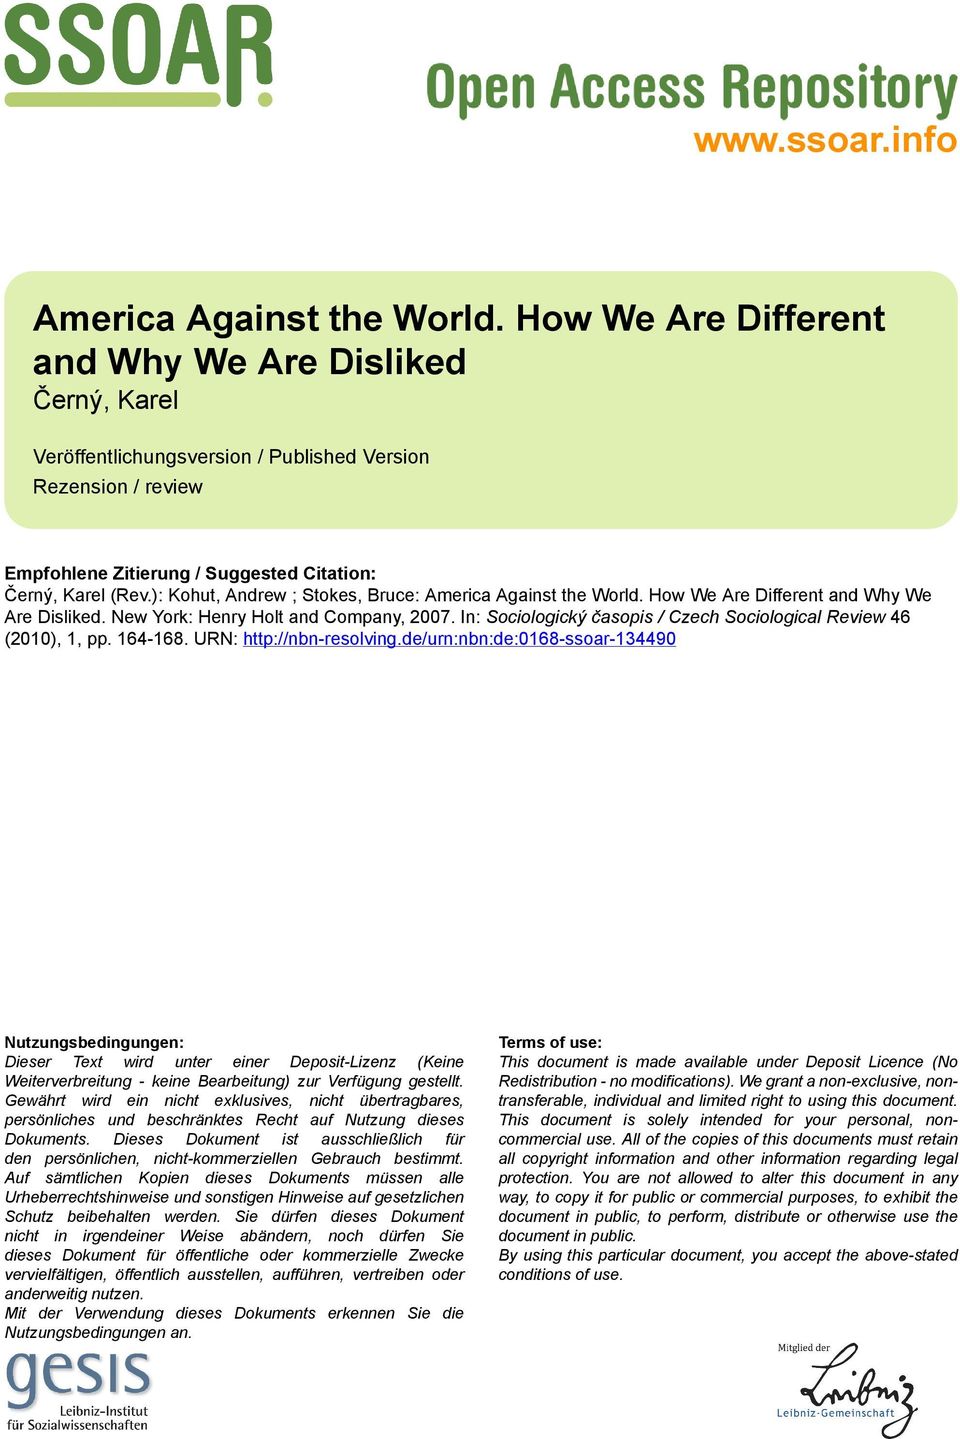 ): Kohut, Andrew ; Stokes, Bruce: America Against the World. How We Are Different and Why We Are Disliked. New York: Henry Holt and Company, 2007.